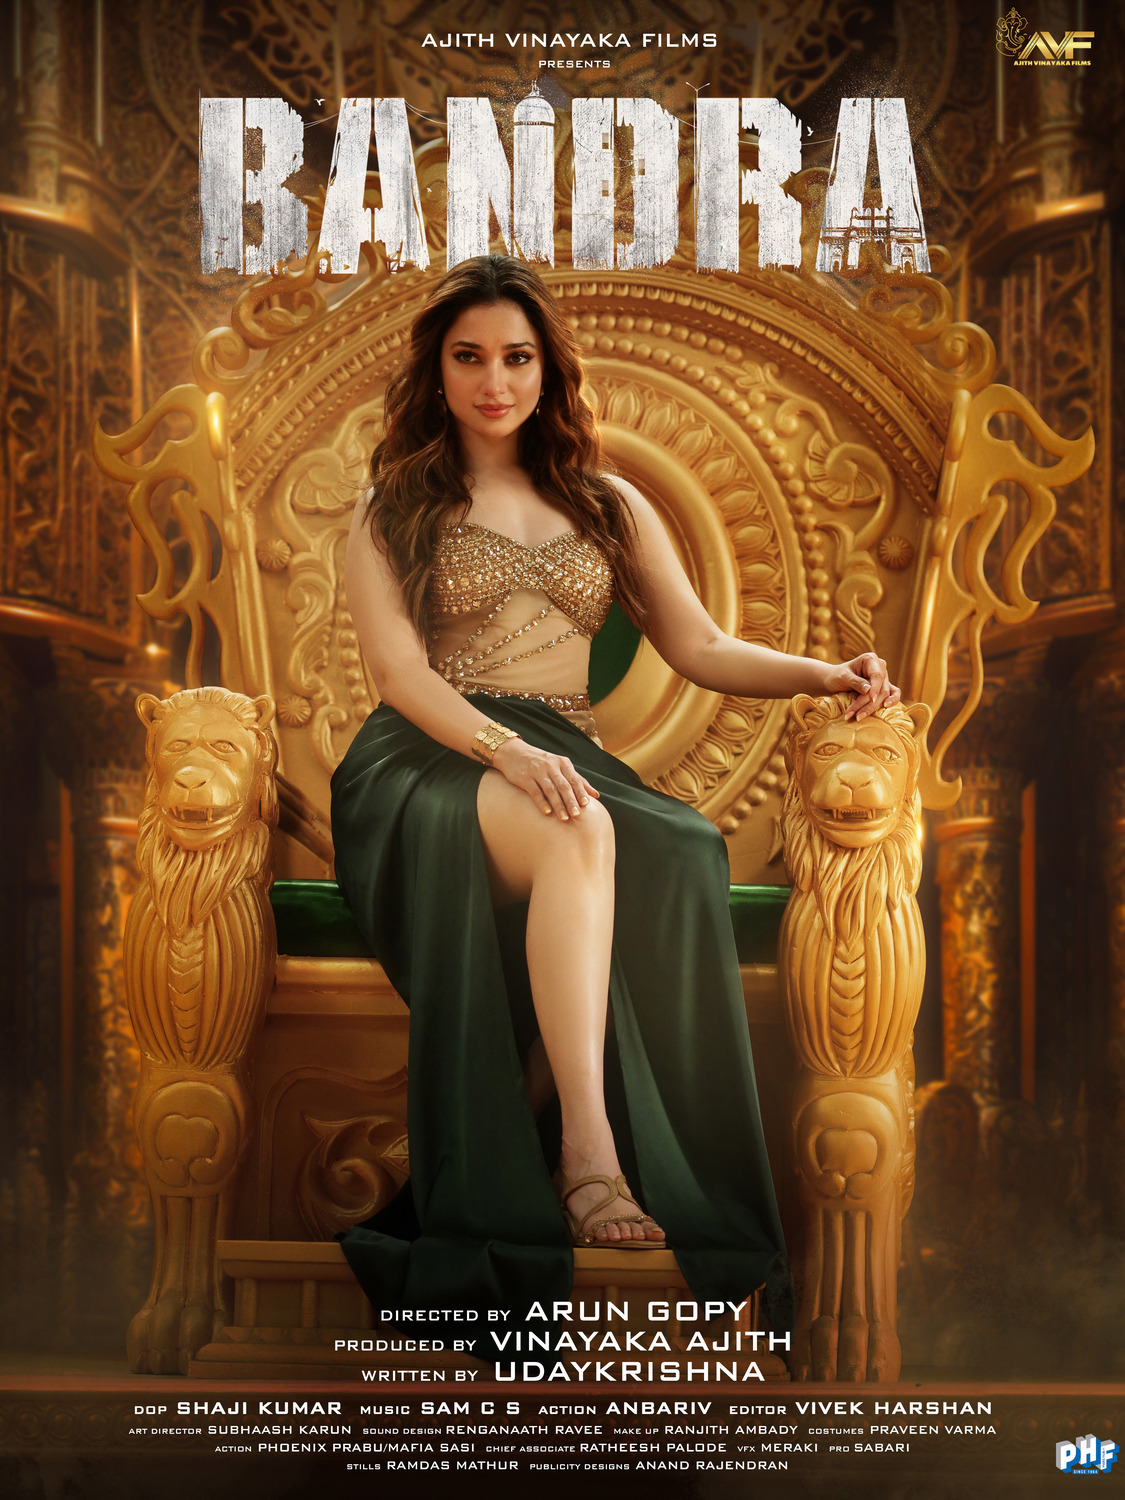 Extra Large Movie Poster Image for Bandra (#11 of 11)